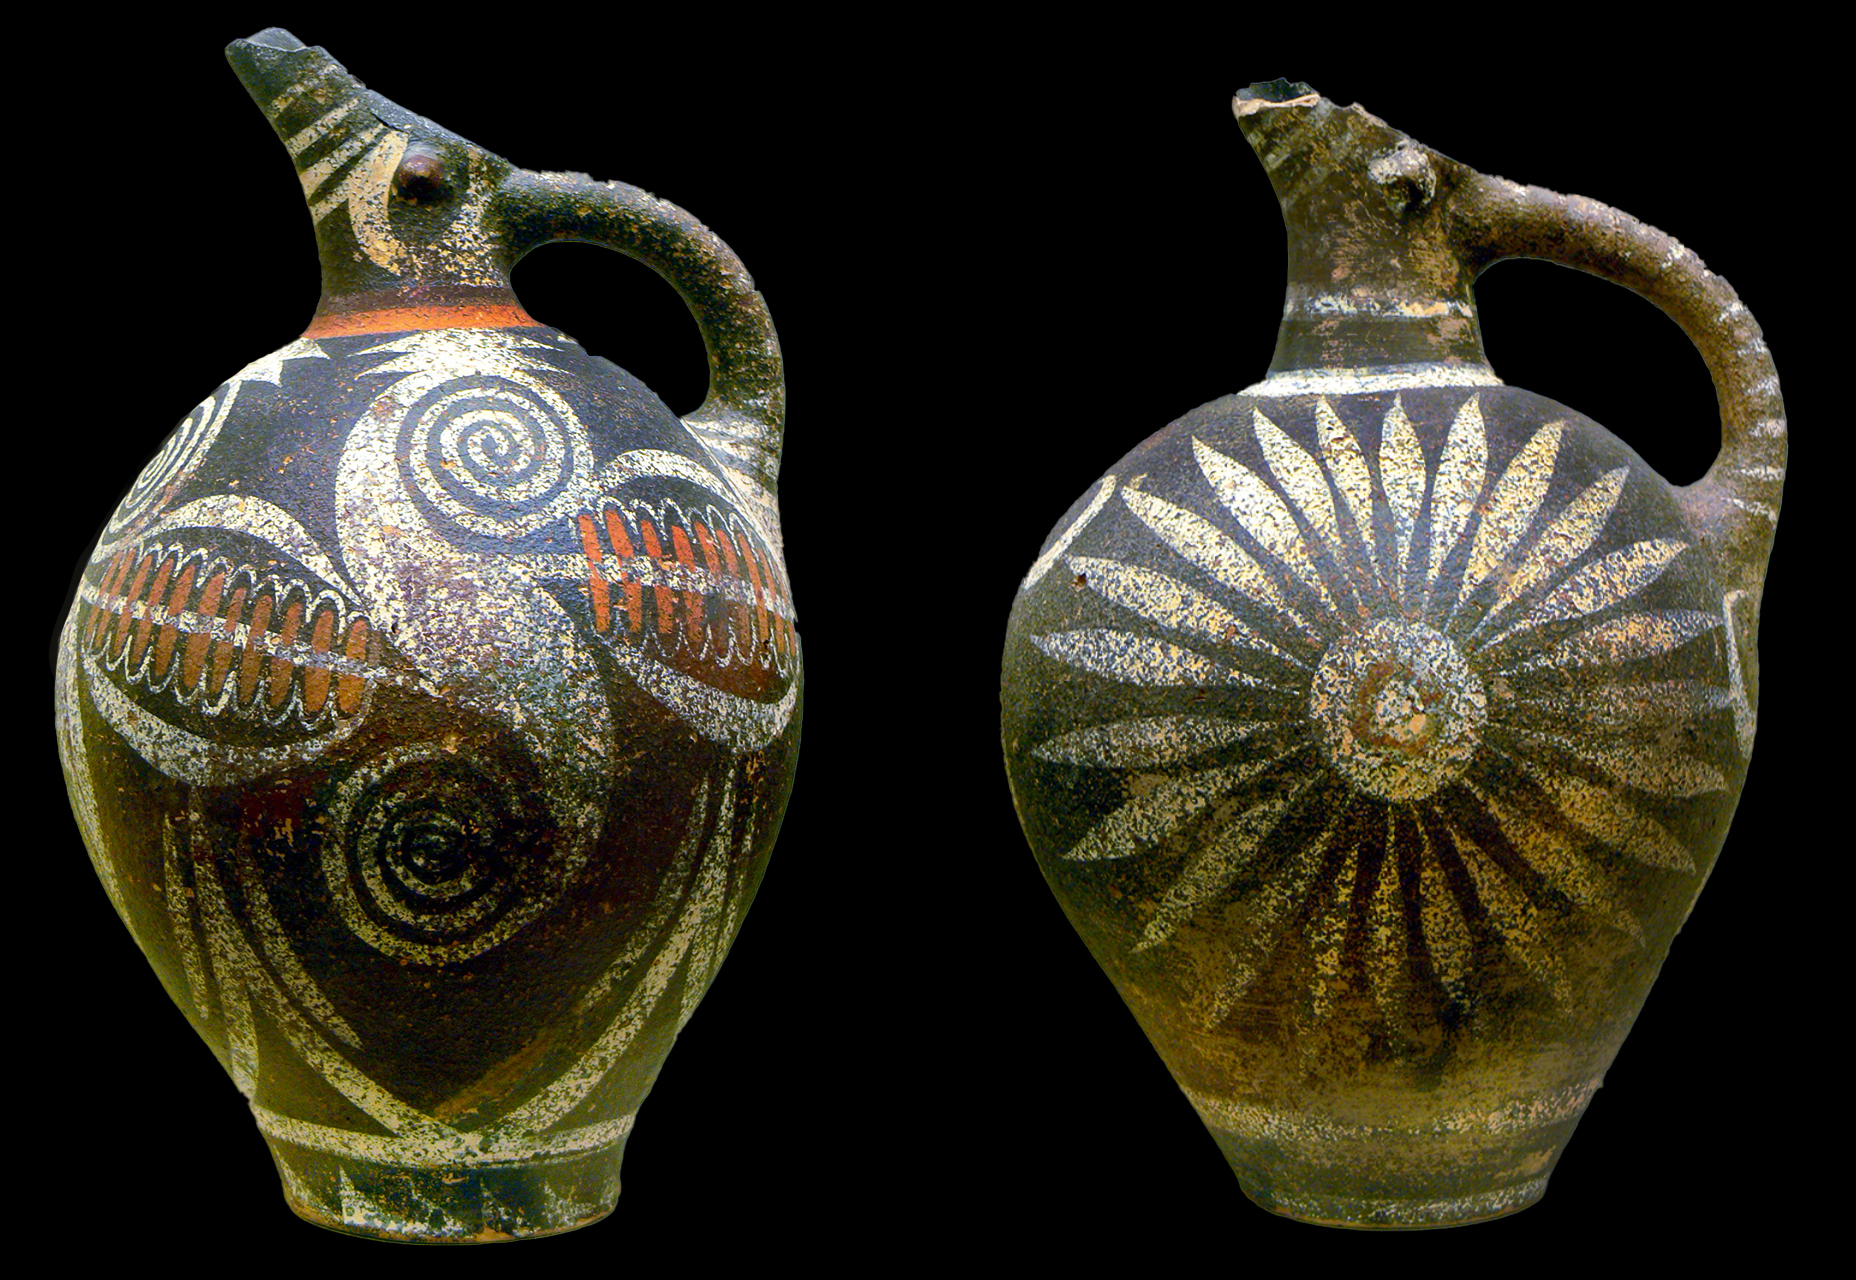 Image of two Kamares ware vases, unique to Minoan culture. These vases feature distinct white designs on a dark background, ranging from sweeping spirals to abstract natural motifs.